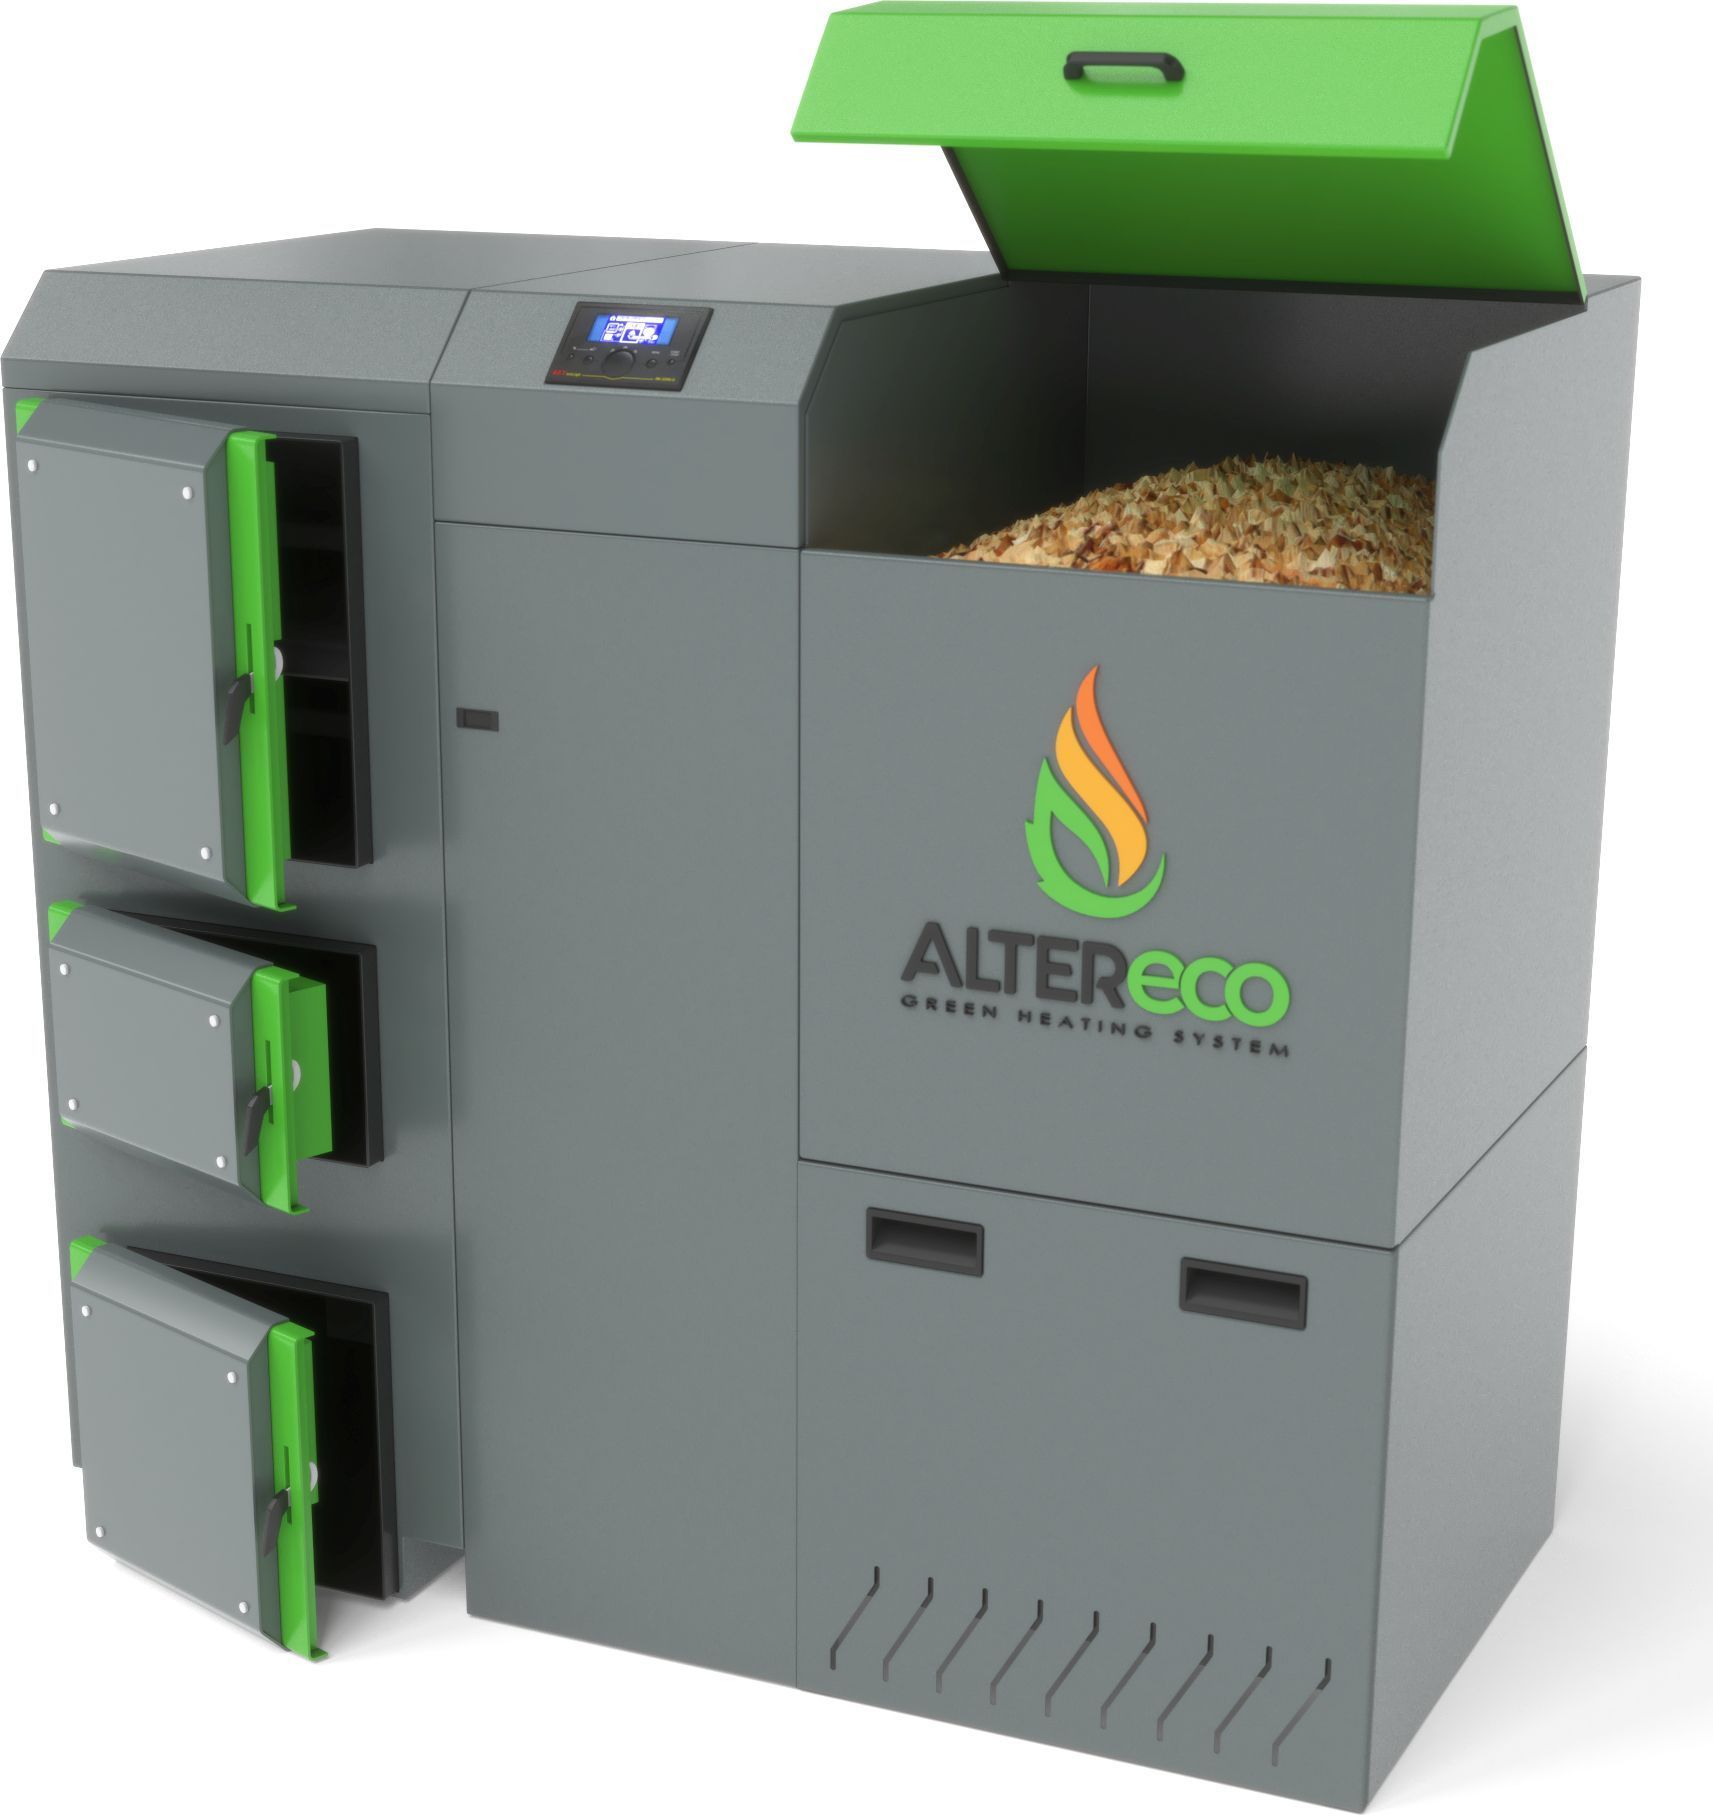 Altereco ECO-QUENTIN wood chip boilers